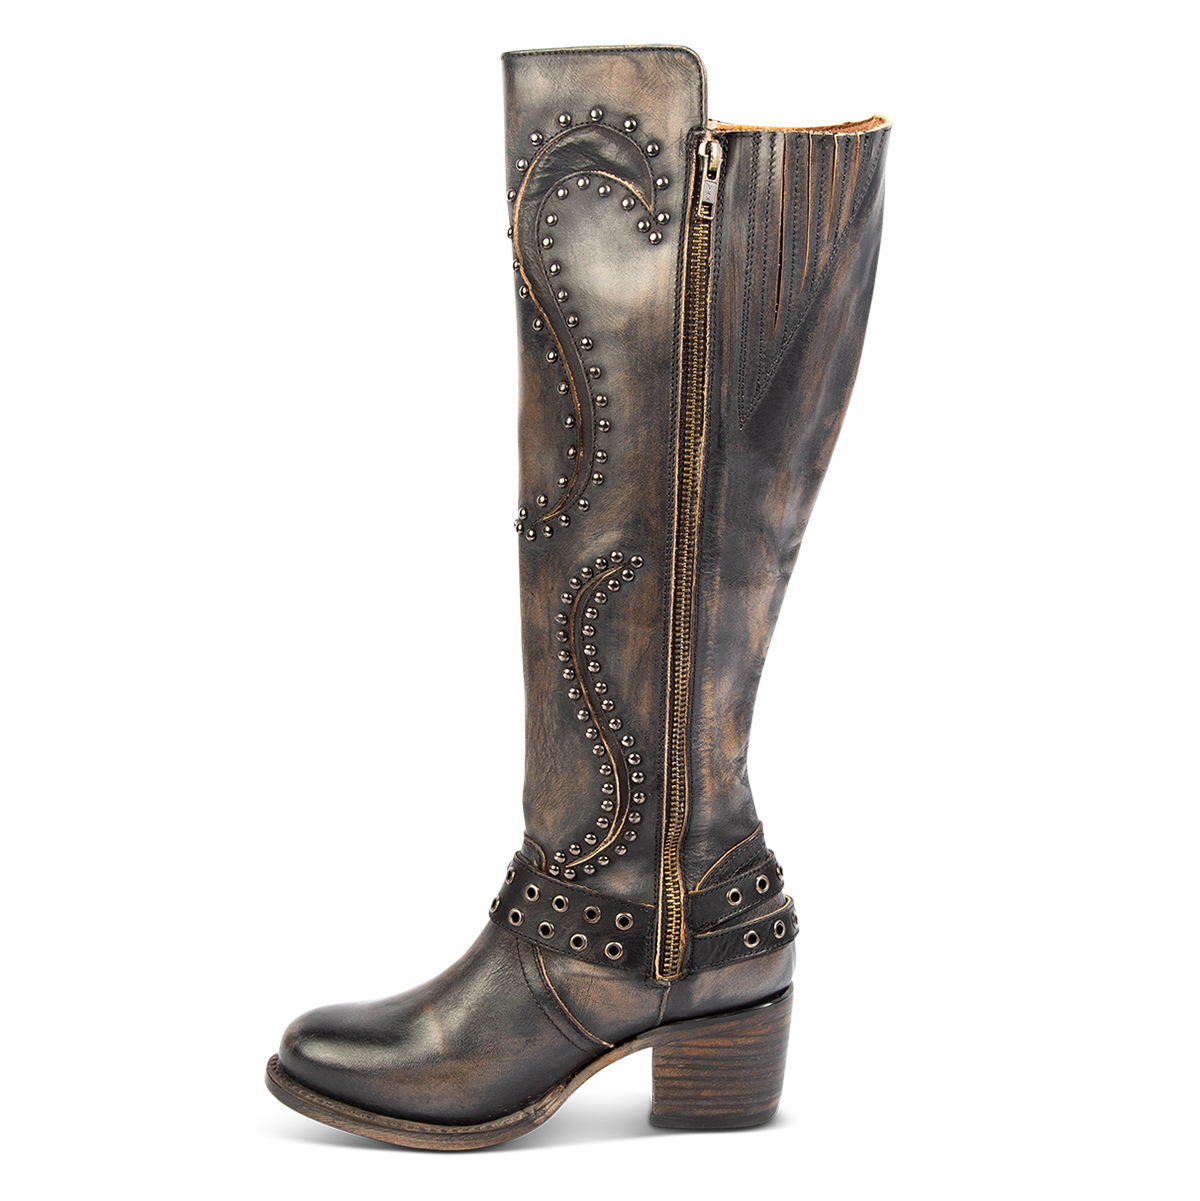 Inside view showing full inside working brass zipper and stud and stitch detailing on FREEBIRD women's Coyote black leather knee high boot 